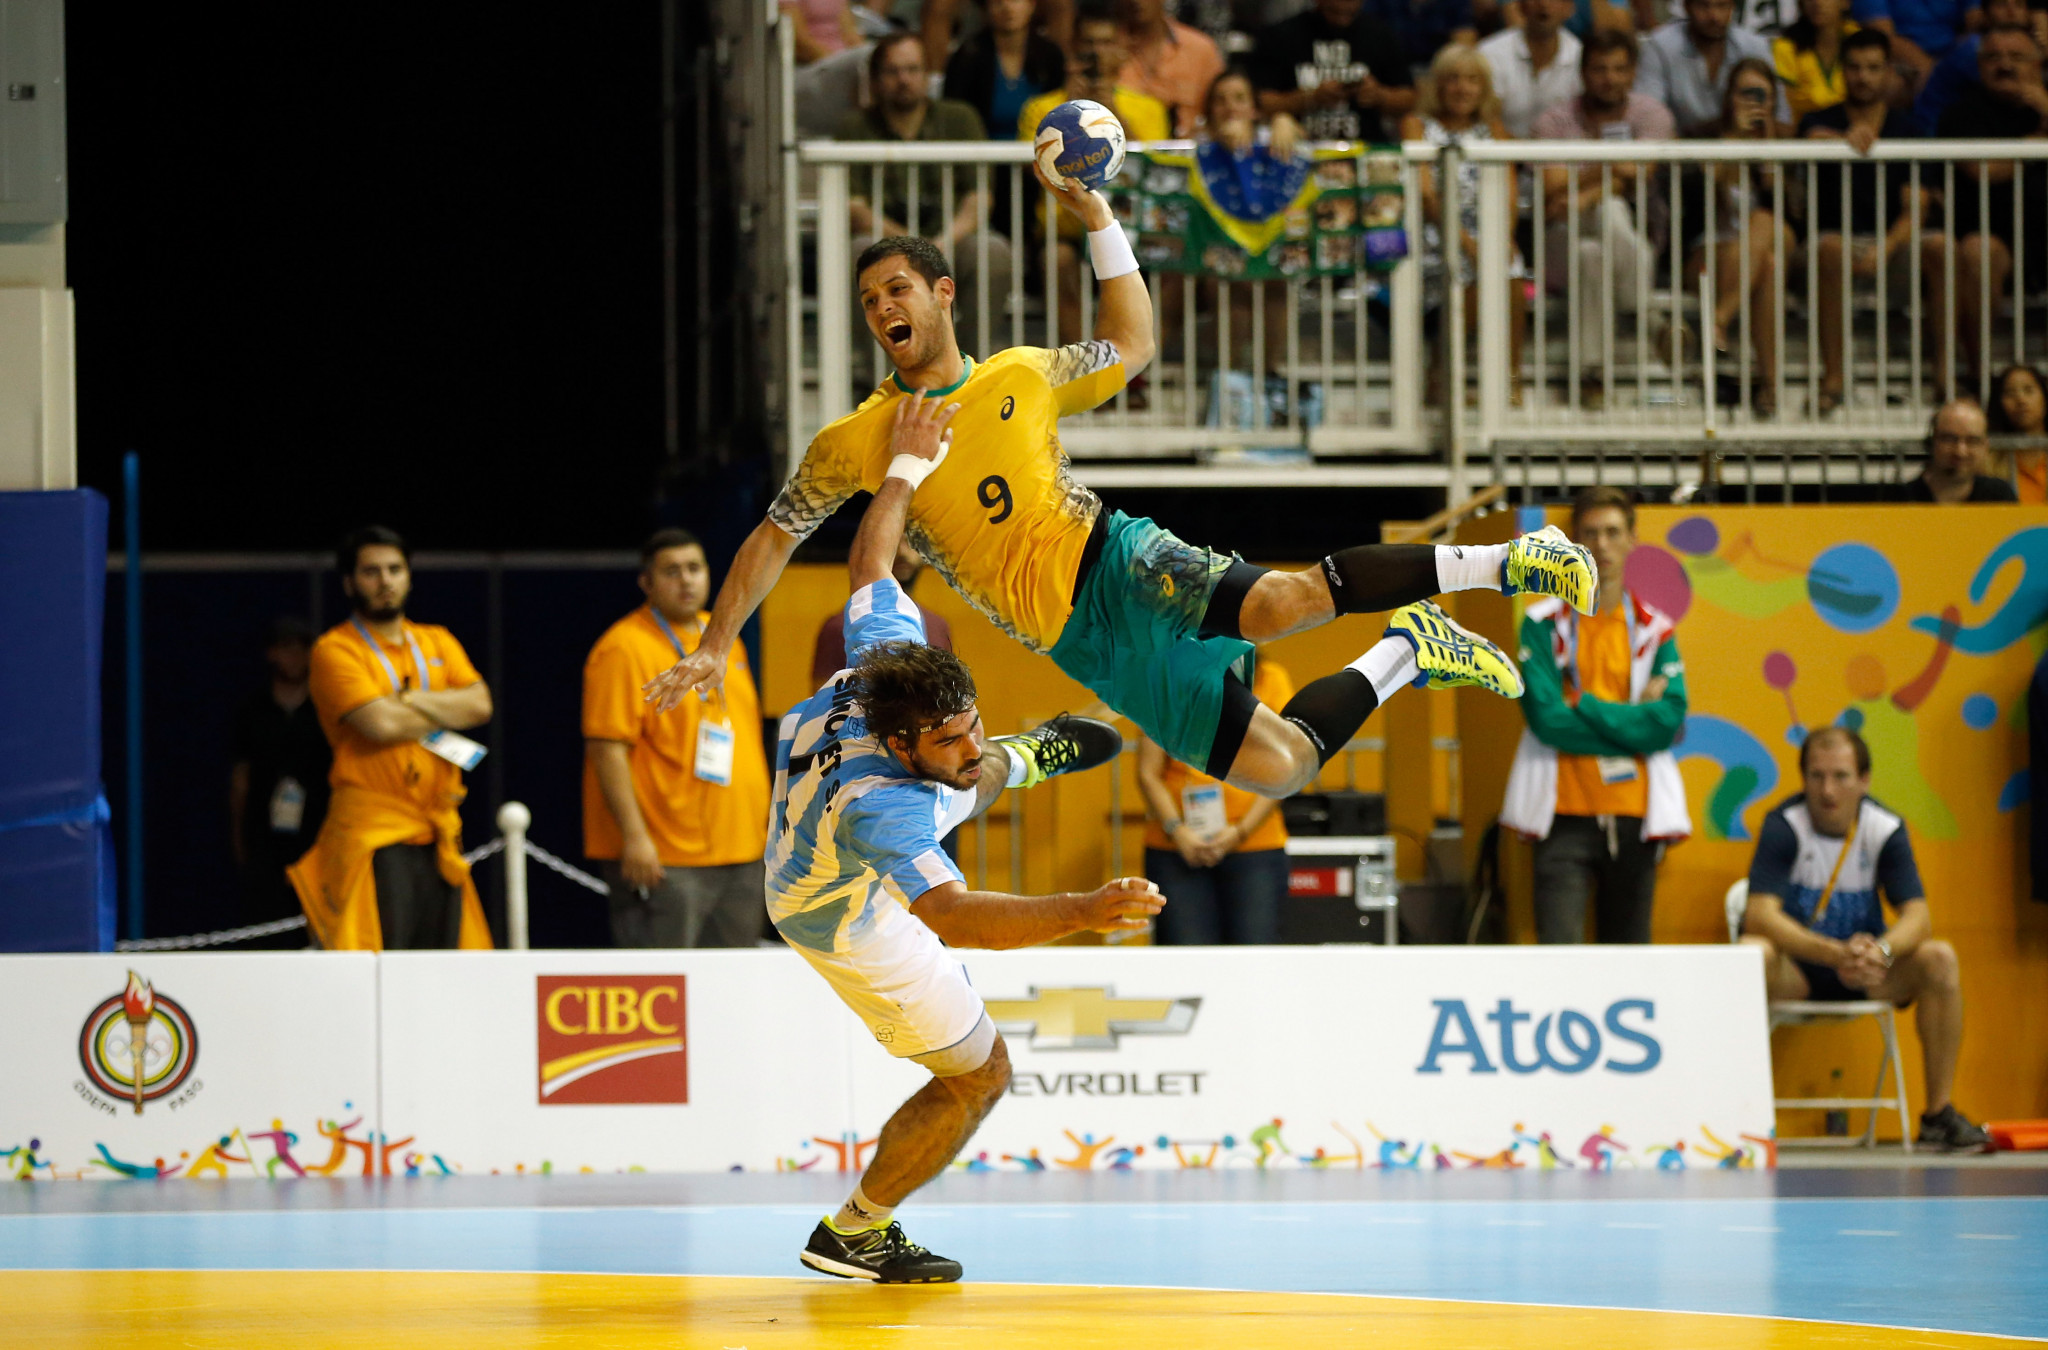 Brazil comfortably beat Canada as they begun their quest to retain their title on the opening day of the 2018 Pan American Men’s Handball Championship in Nuuk in Greenland ©Getty Images